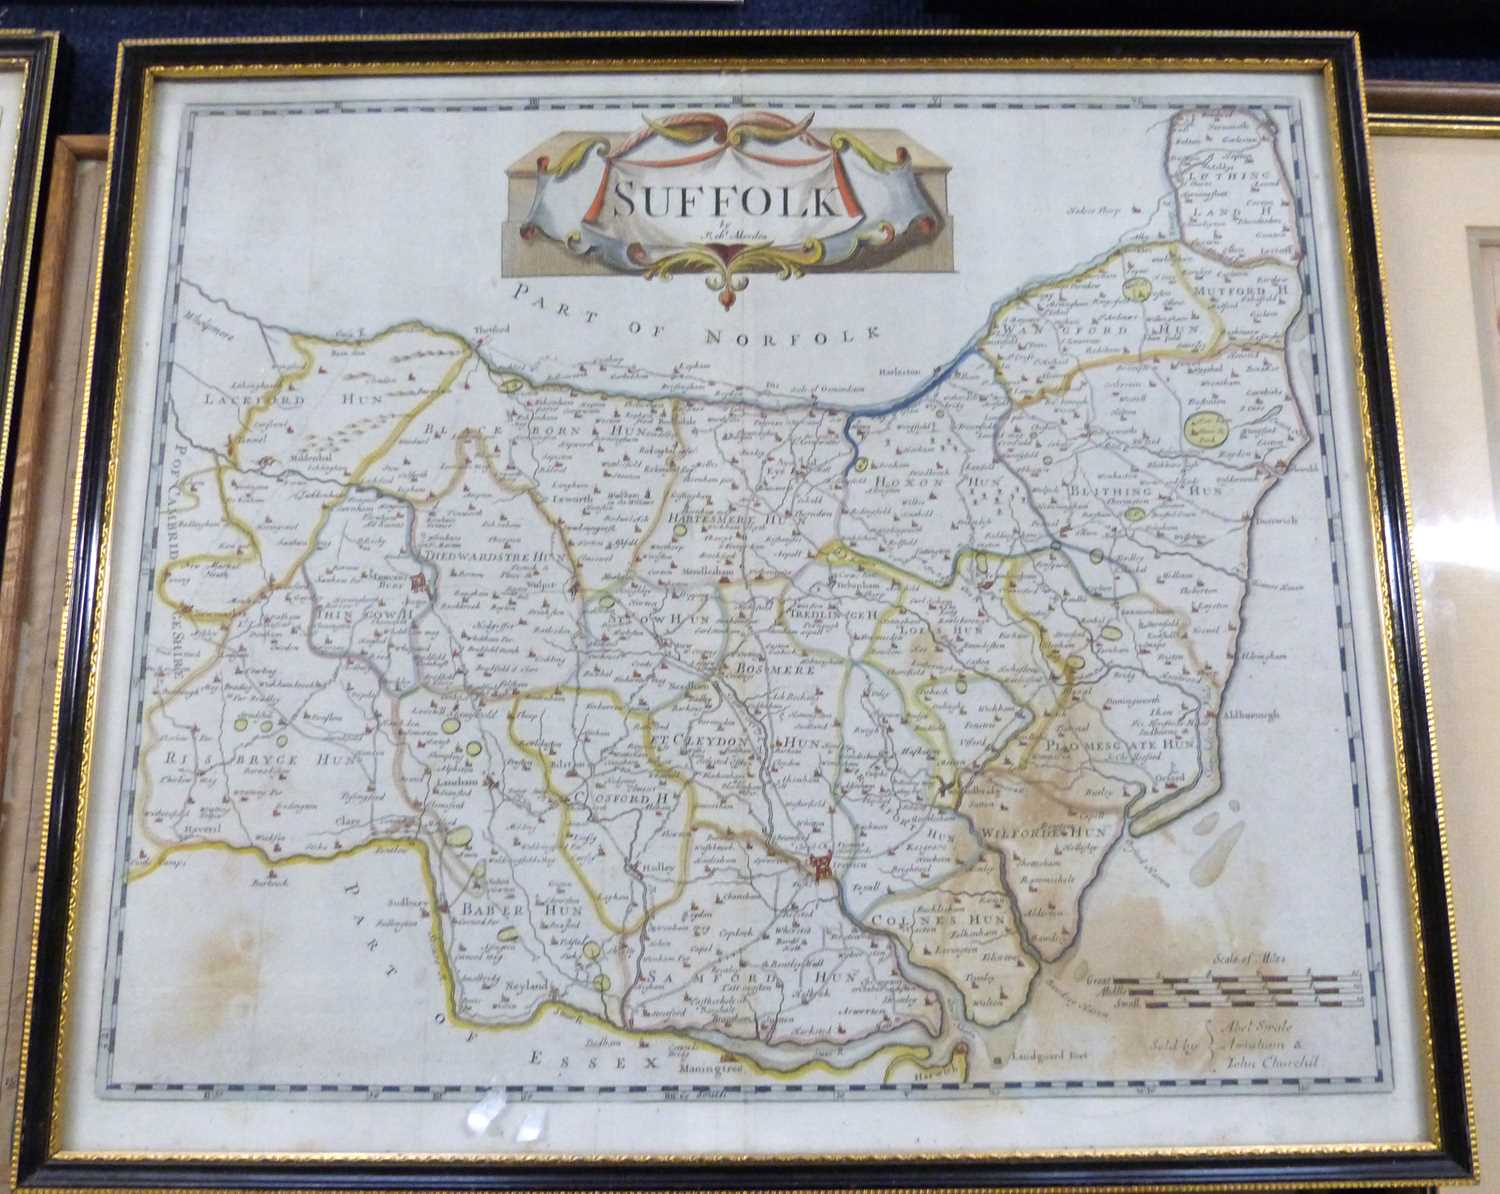 ROBERT MORDEN: SUFFOLK, engraved hand coloured map [1695], approx 360 x 420mm, framed and glazed - Image 2 of 4